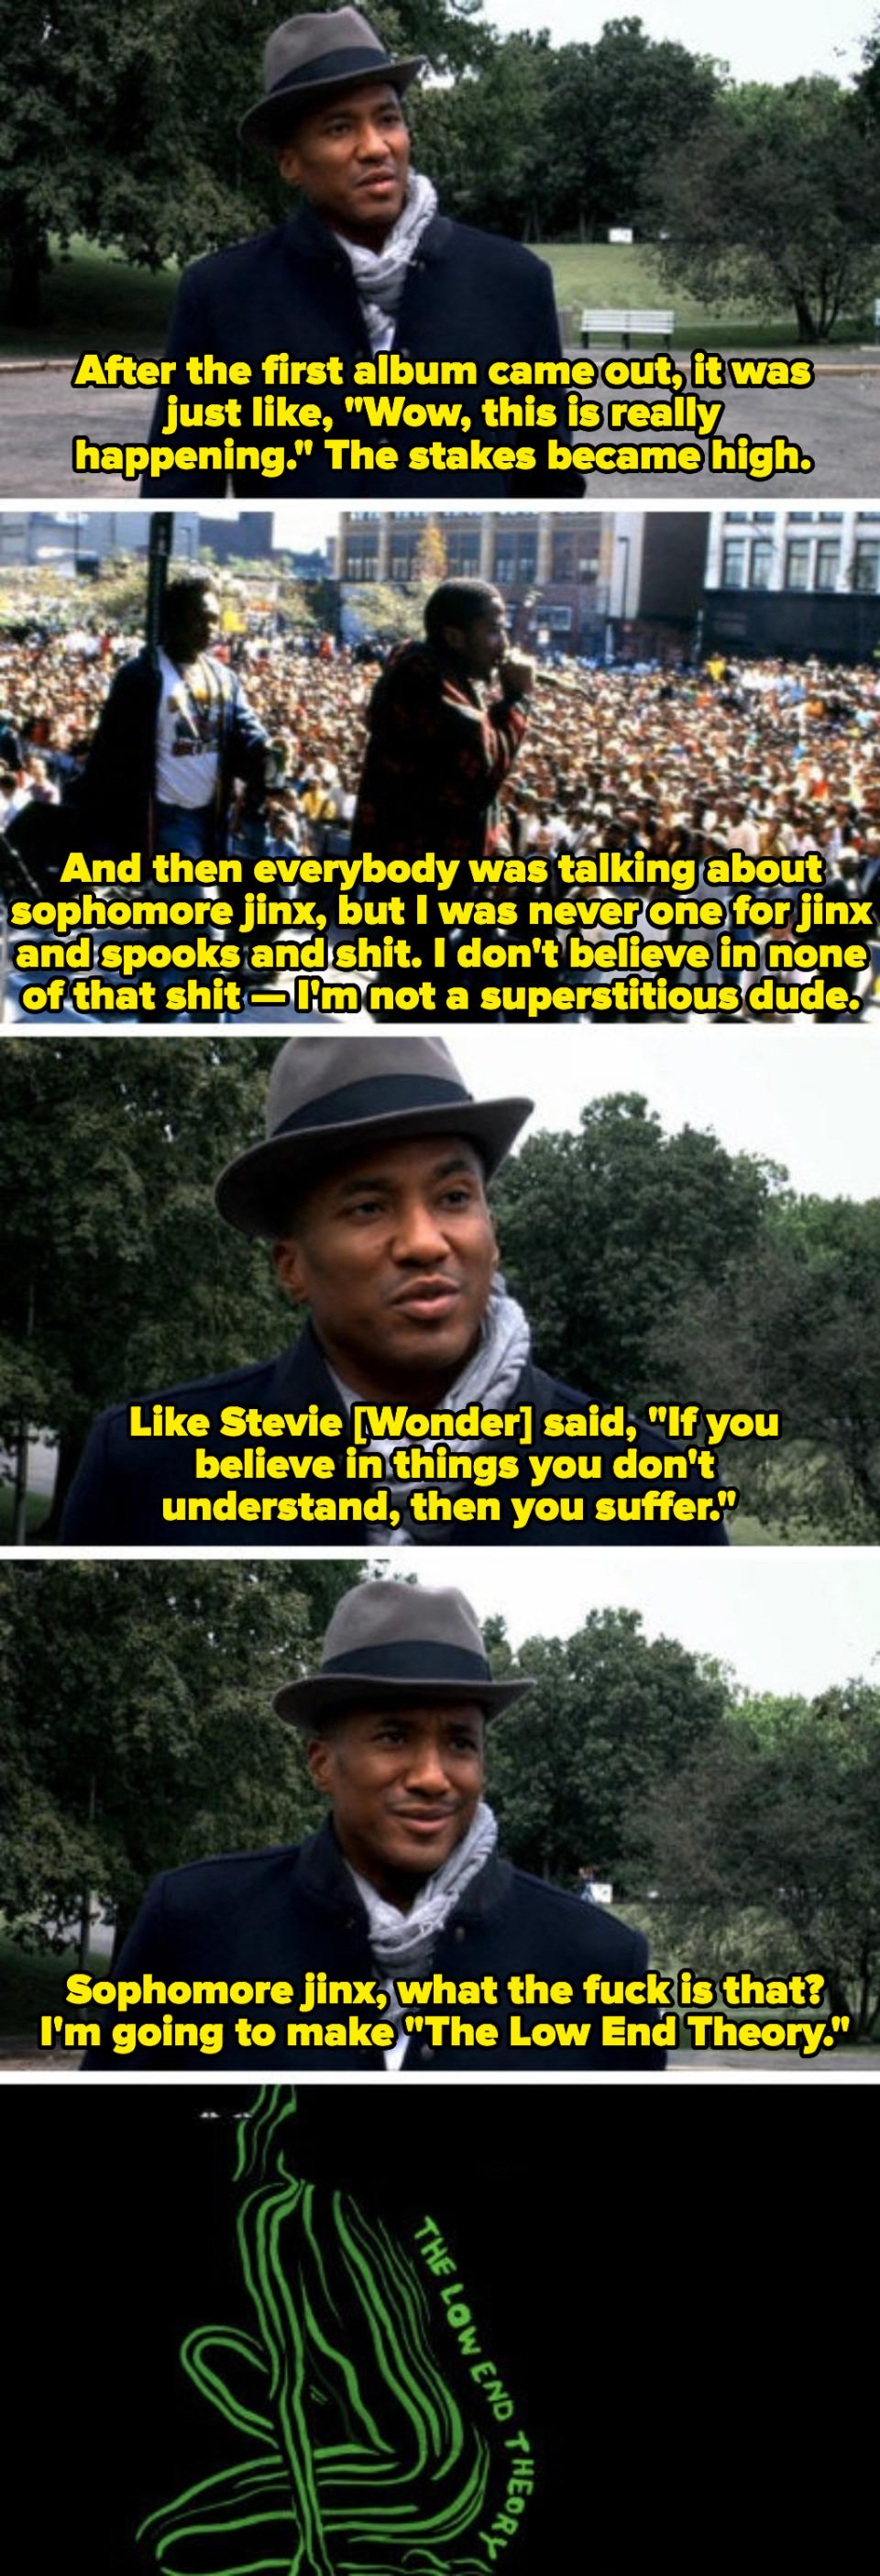 Q-Tip discussing his disbelief in sophomore jinx, saying: "Like Stevie Wonder said, 'If you don't believe in things you don't understand, then you suffer.' Sophomore jinx, what the fuck is that? I'm going to make 'The Low End Theory'"